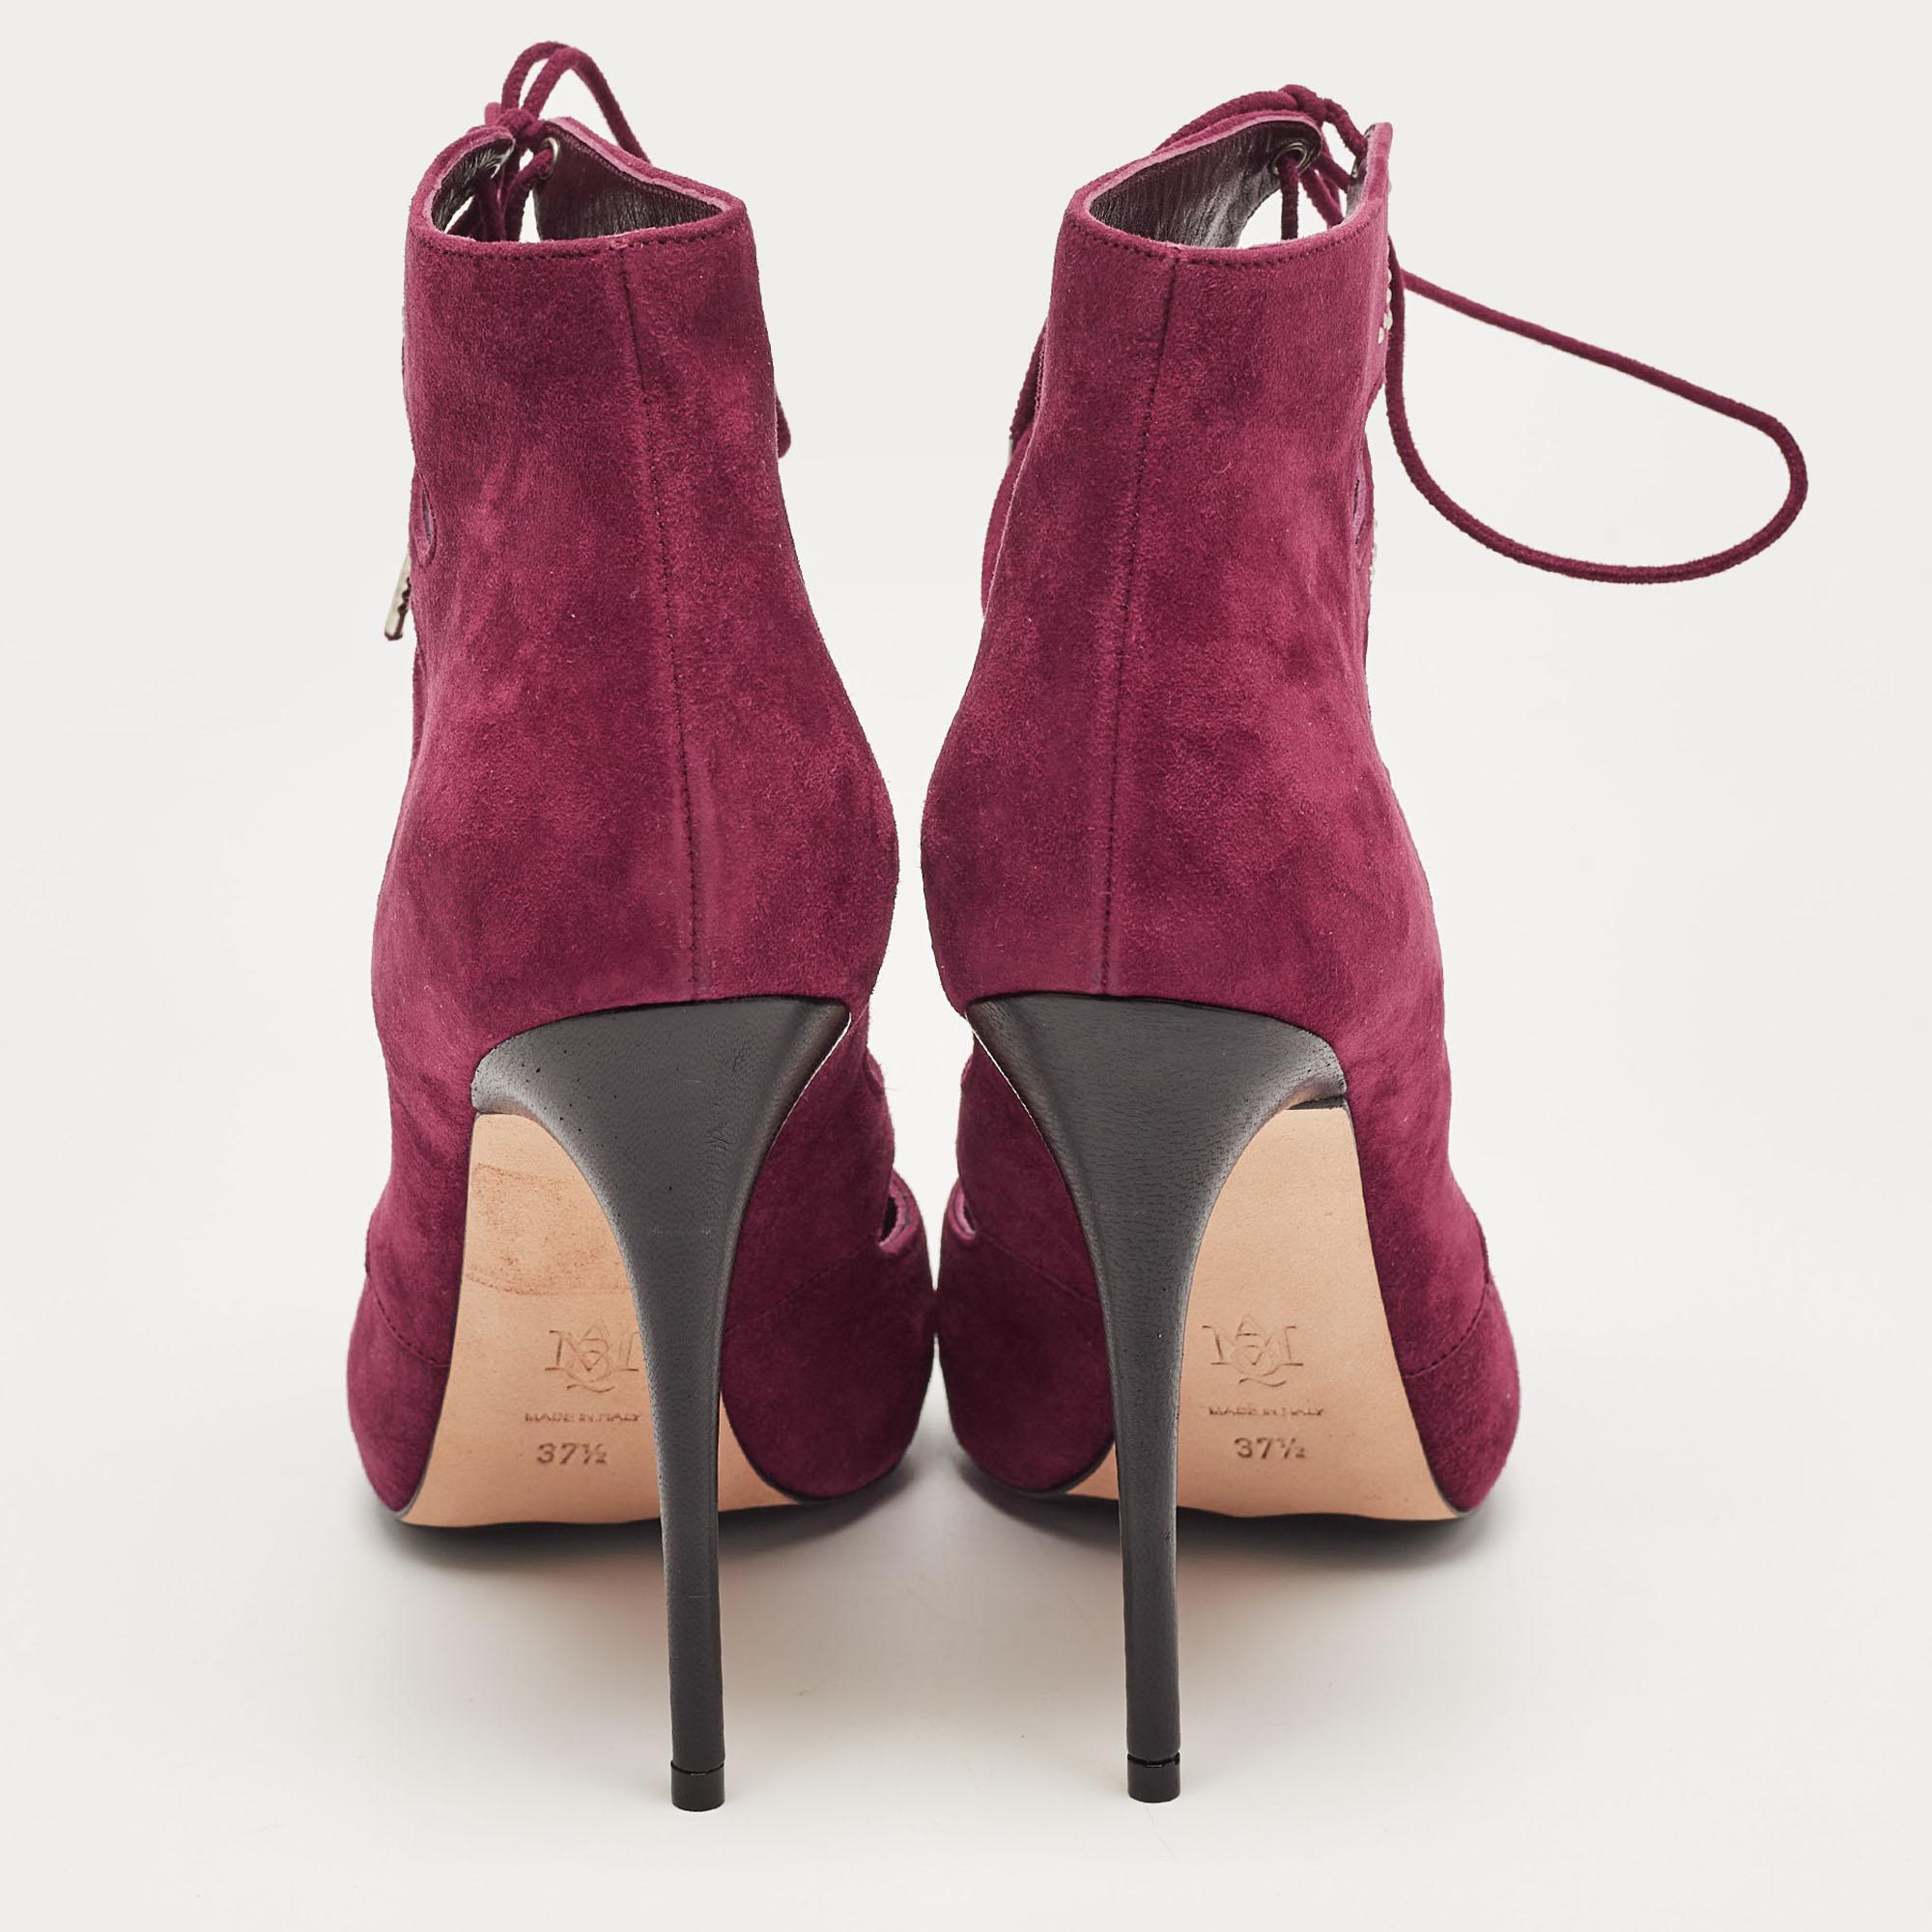 A classic pair of booties is a must-have in every collection, and when the design is by Alexander McQueen, it is sure to add a statement of luxury to your wardrobe. These ankle booties are sure to delight!

Includes: Original Box